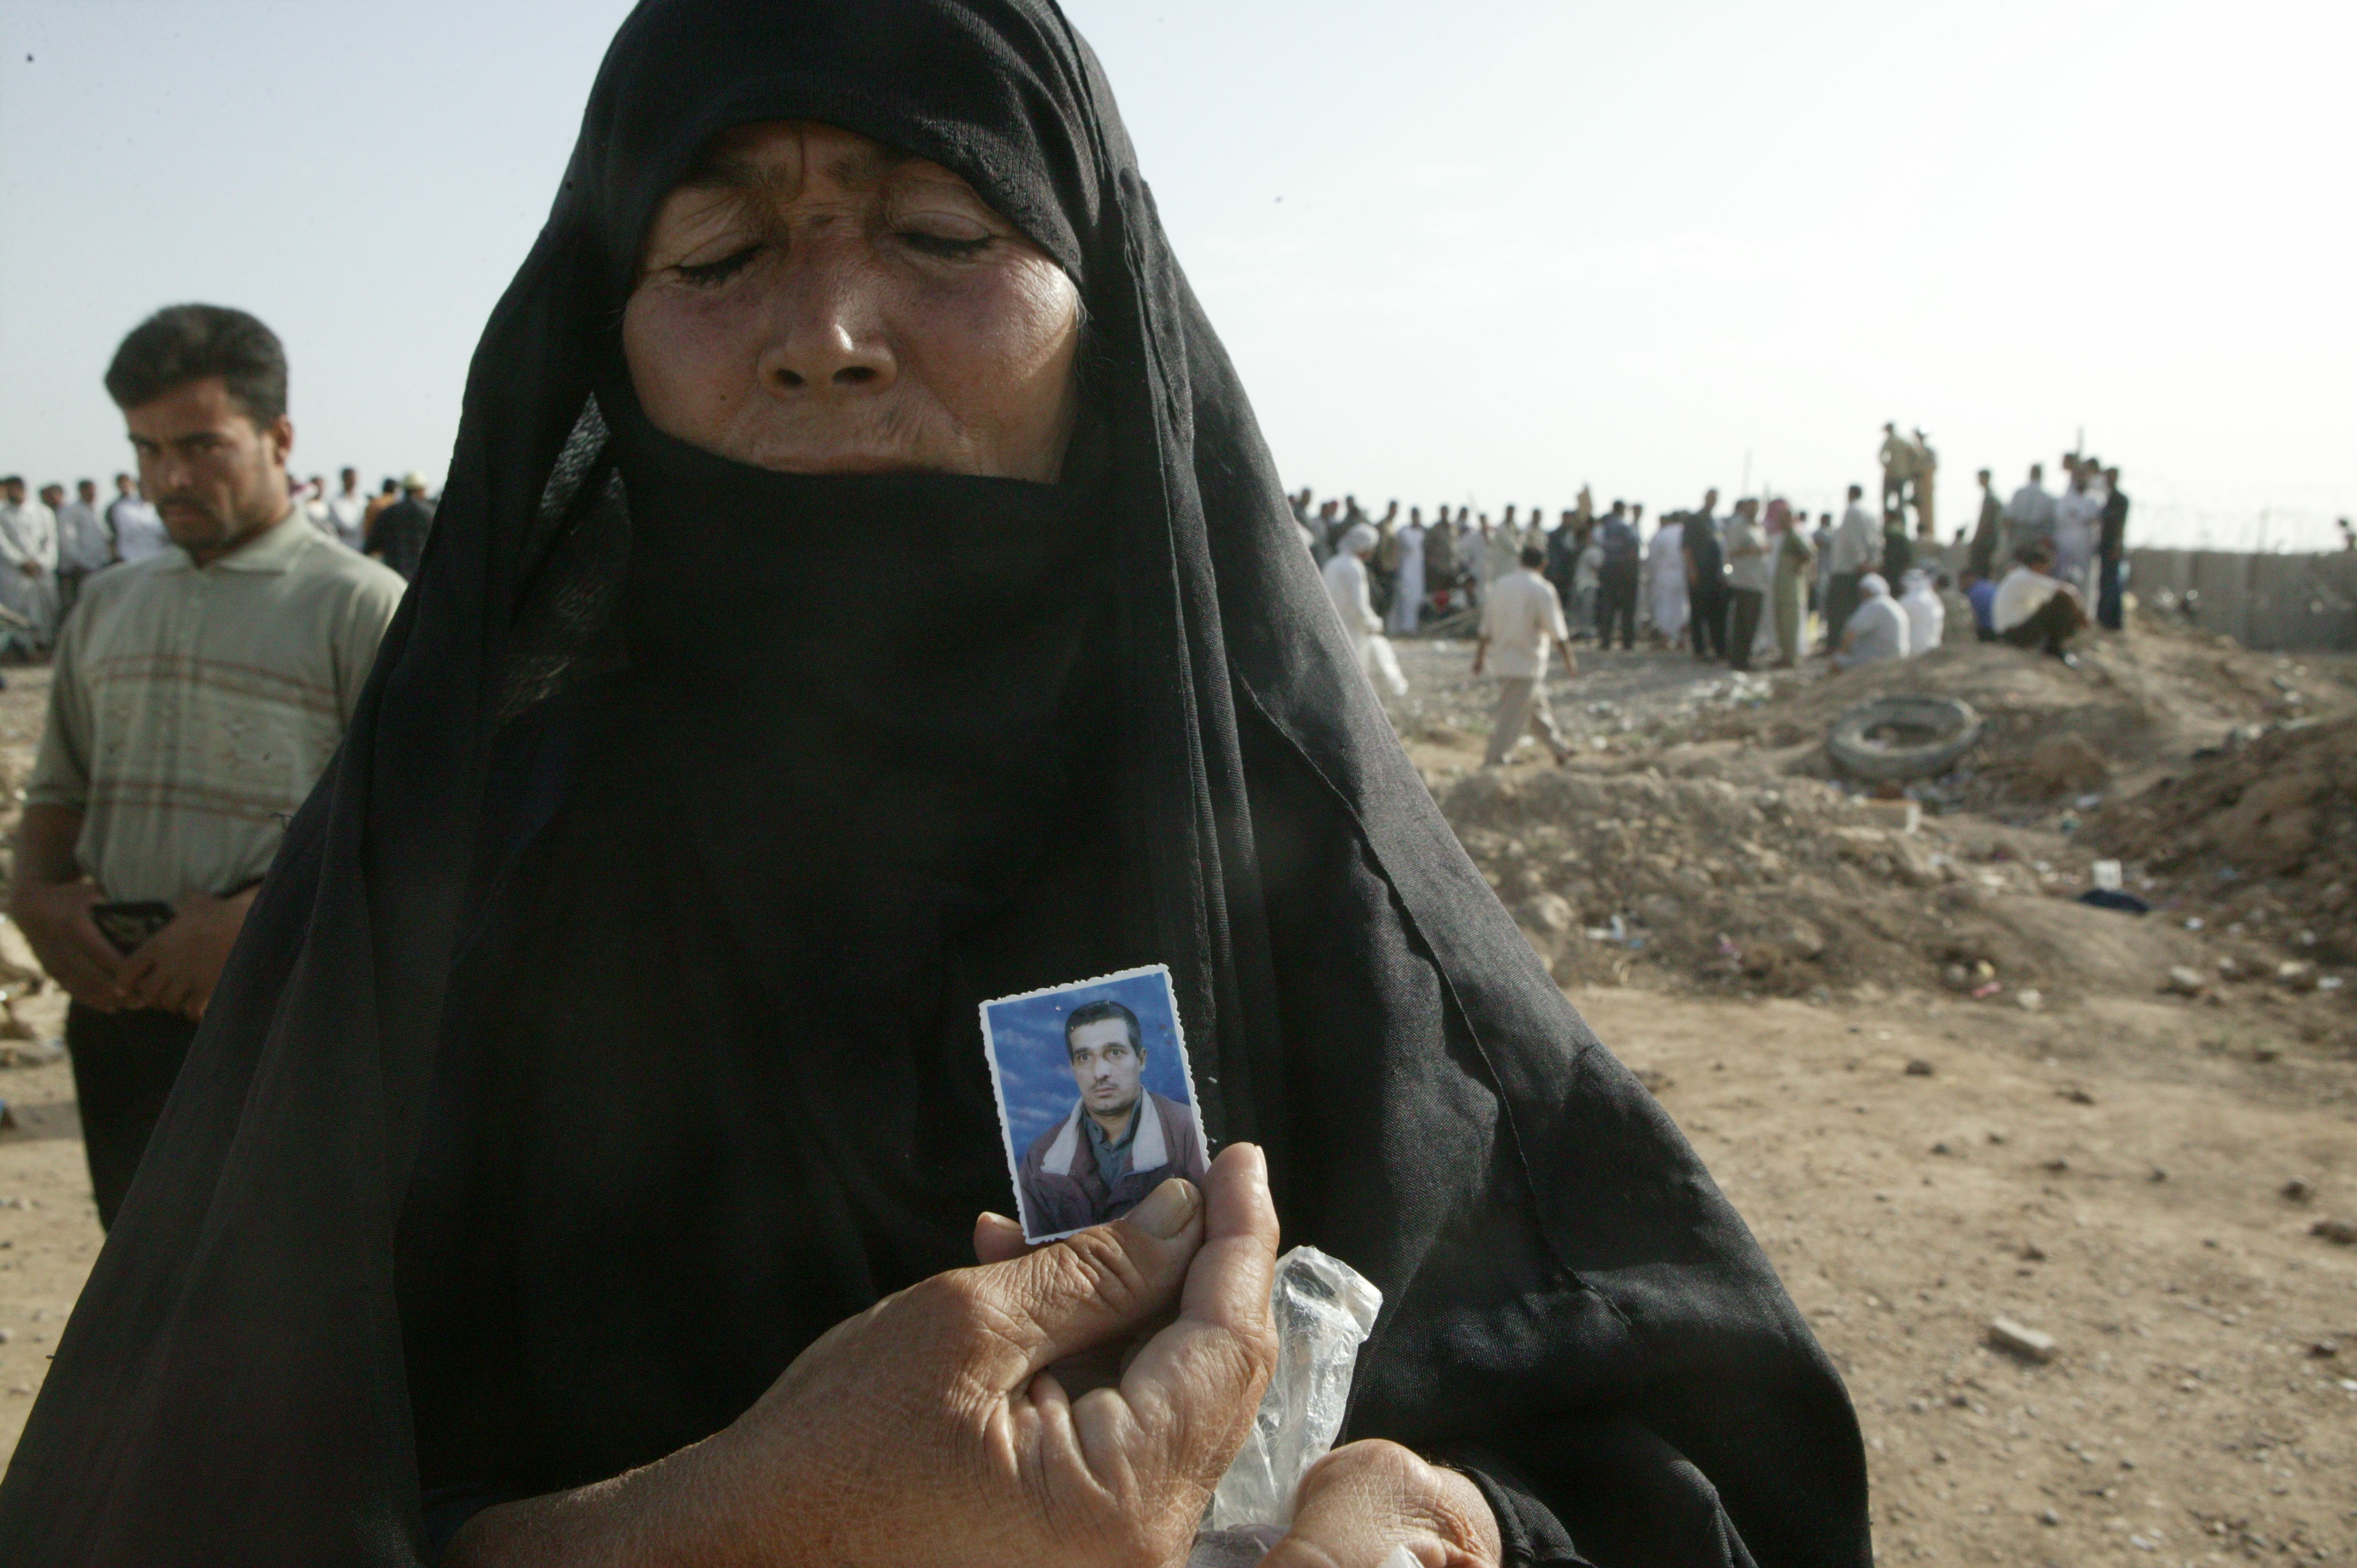 A woman holds up a photo of her son outside Abu Ghraib (photo: Michael Kamber)